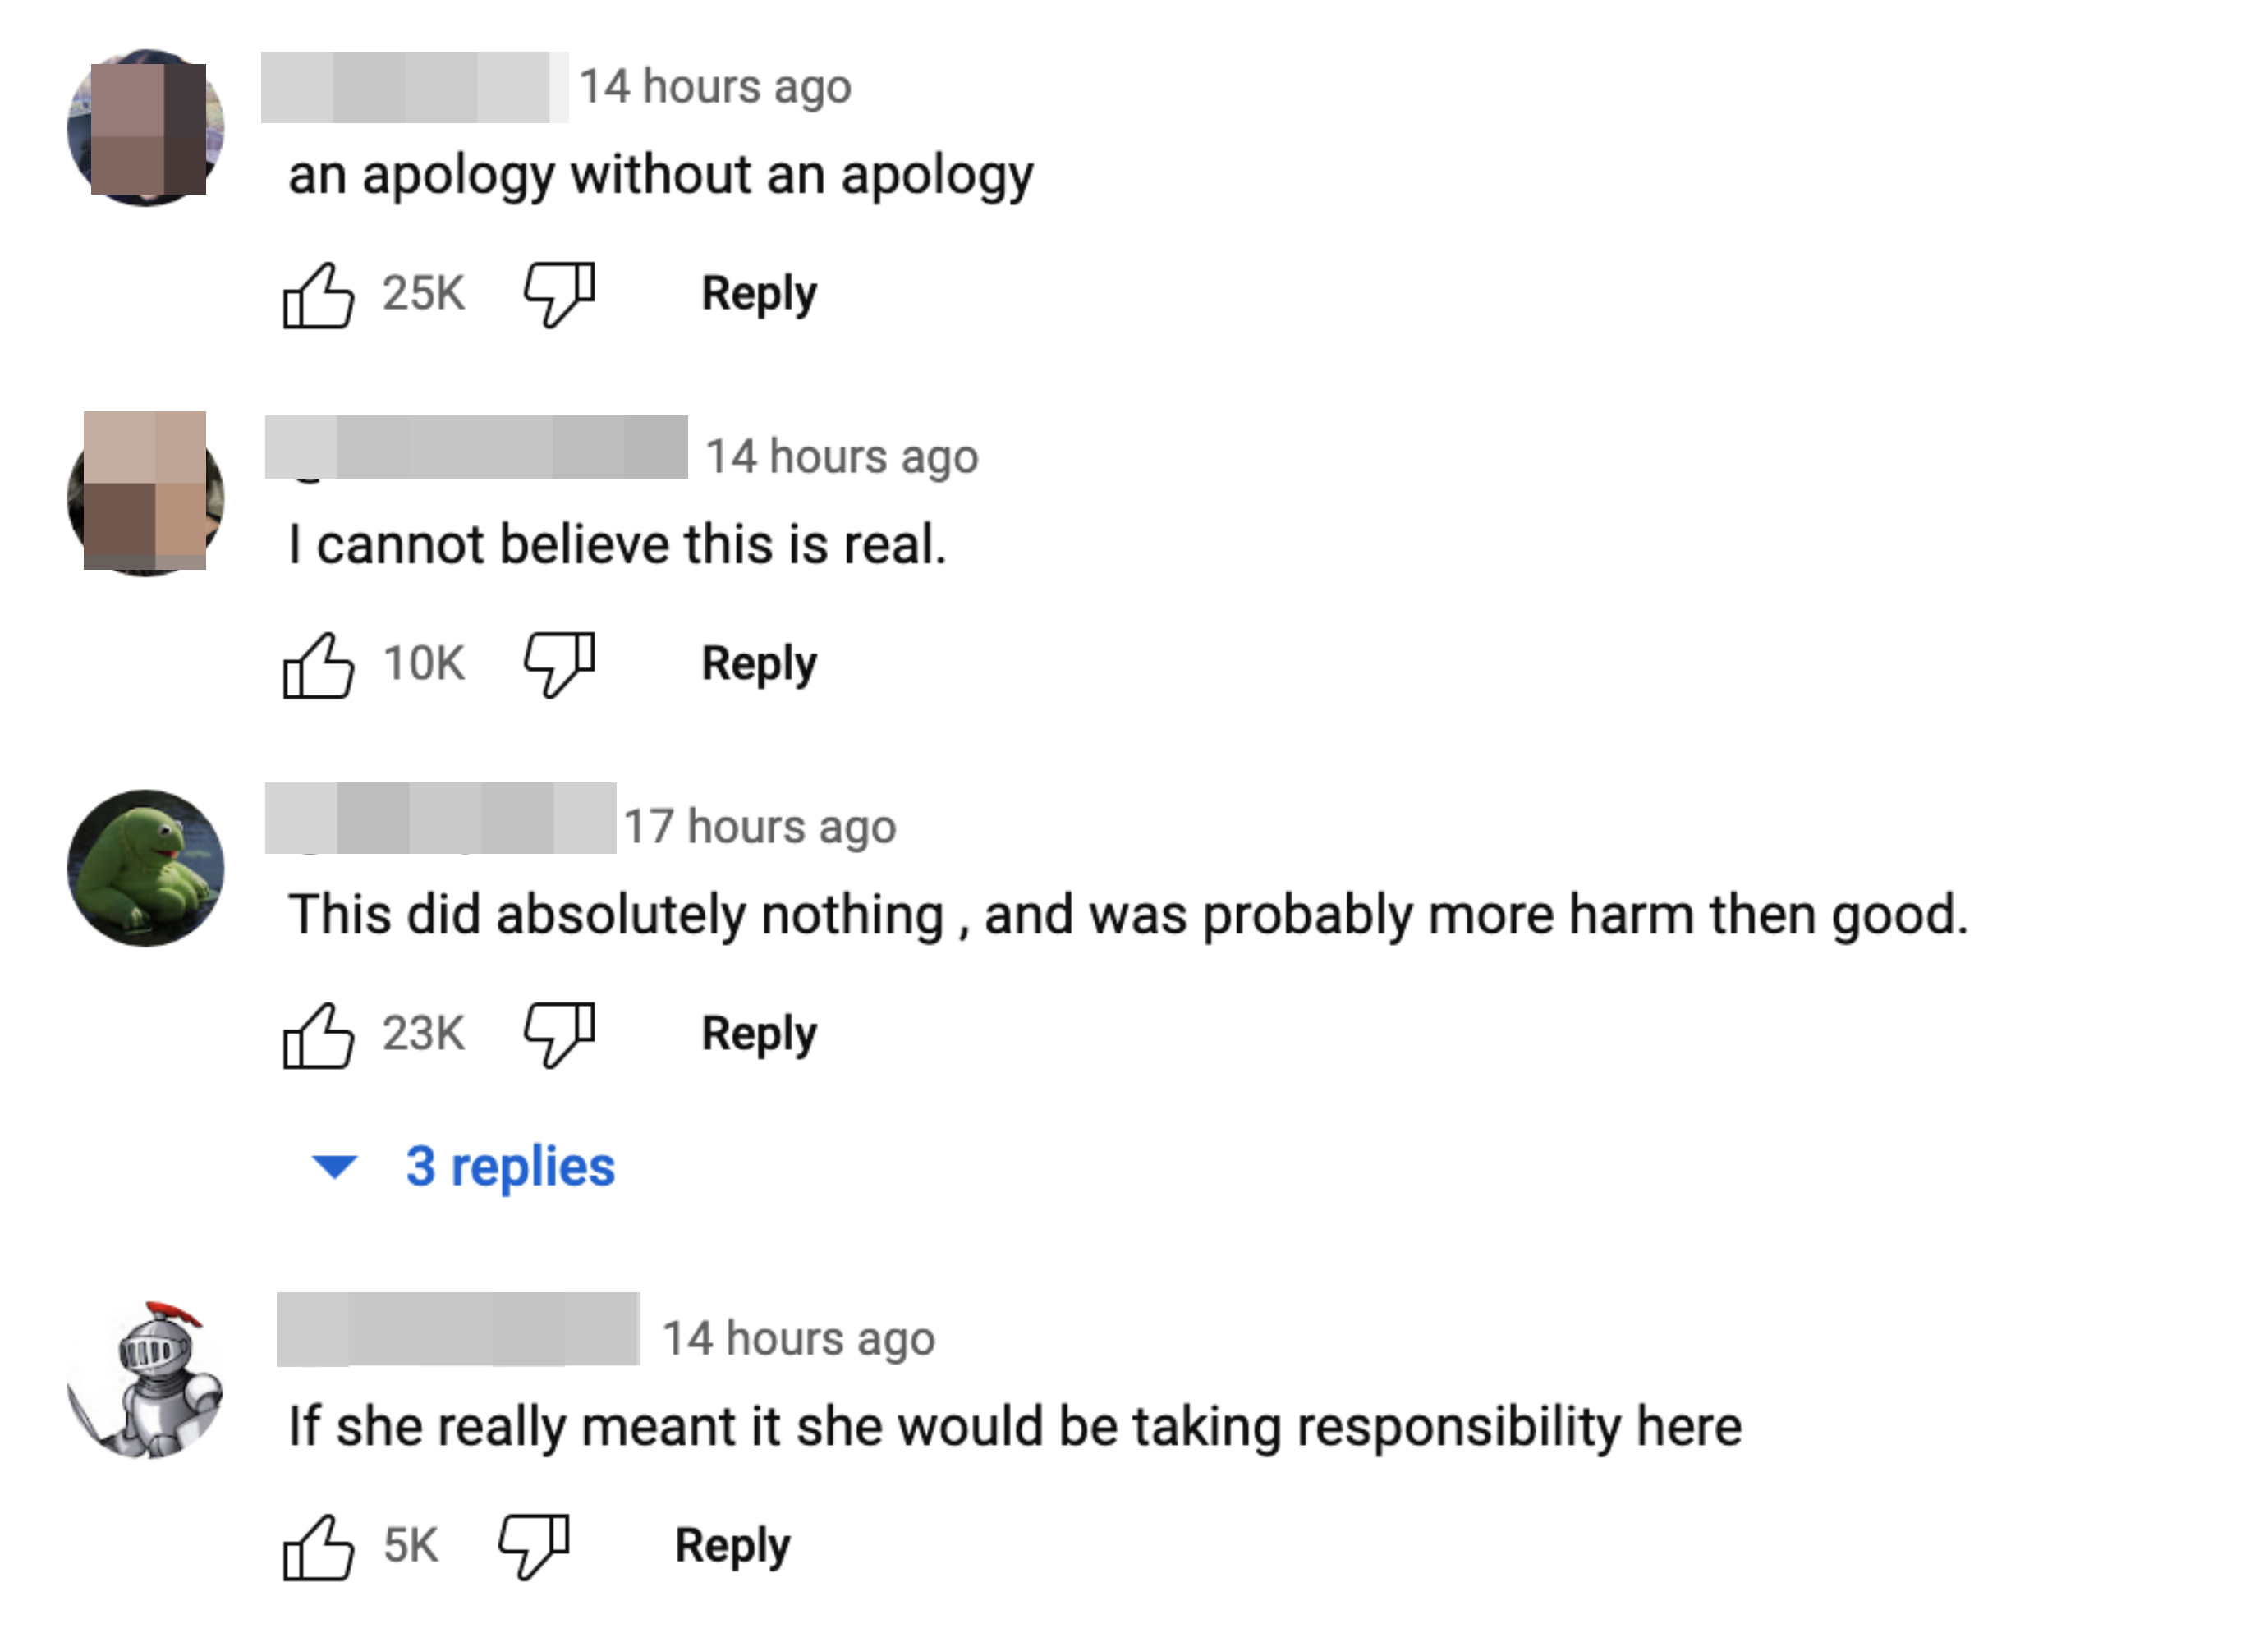 &quot;an apology without an apology&quot;